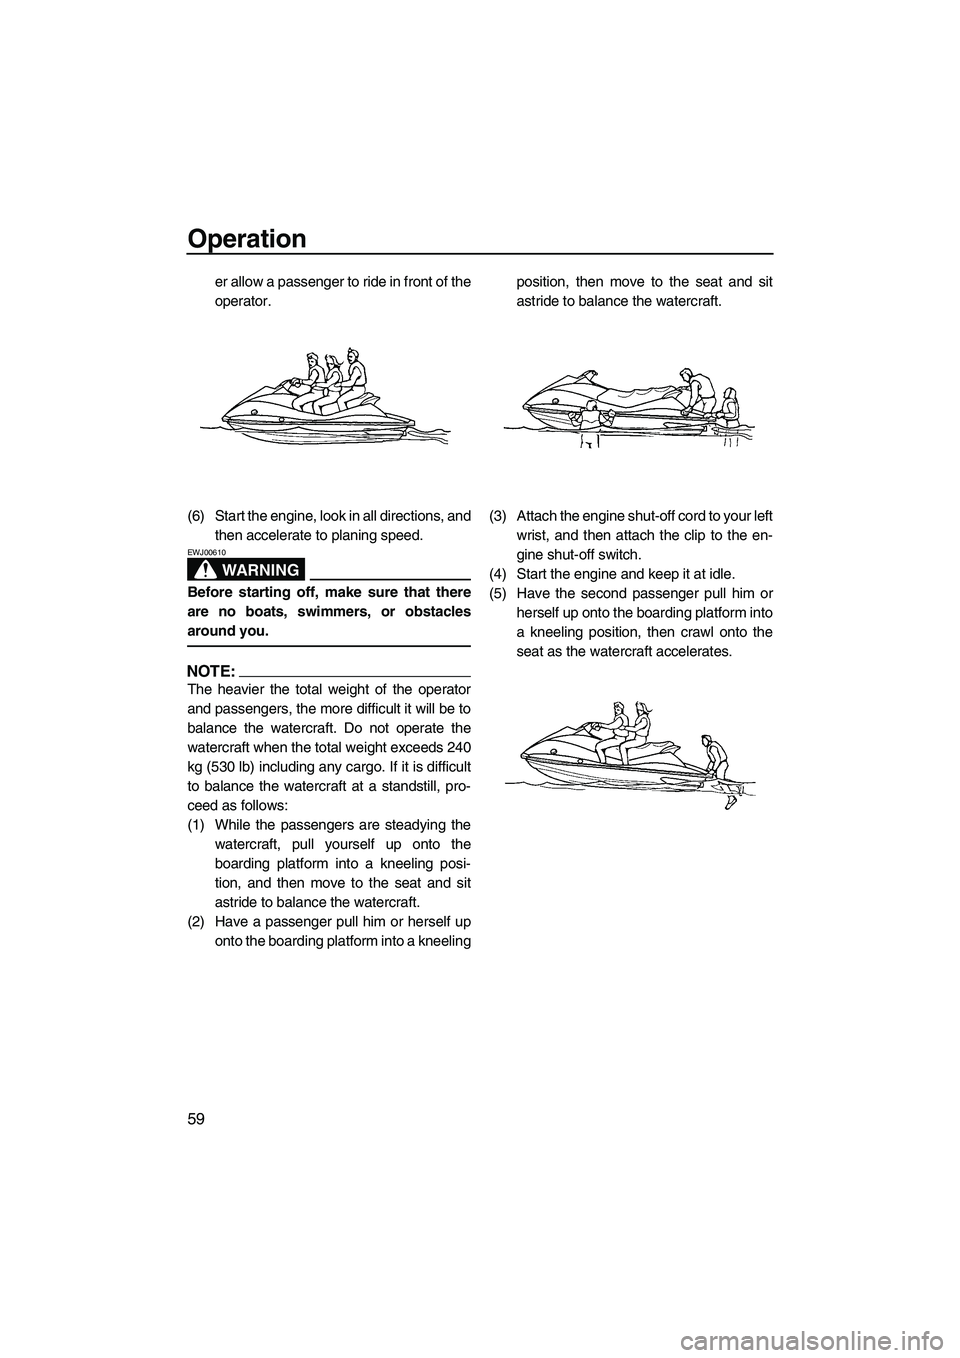 YAMAHA VX SPORT 2007  Owners Manual Operation
59
er allow a passenger to ride in front of the
operator.
(6) Start the engine, look in all directions, and
then accelerate to planing speed.
WARNING
EWJ00610
Before starting off, make sure 